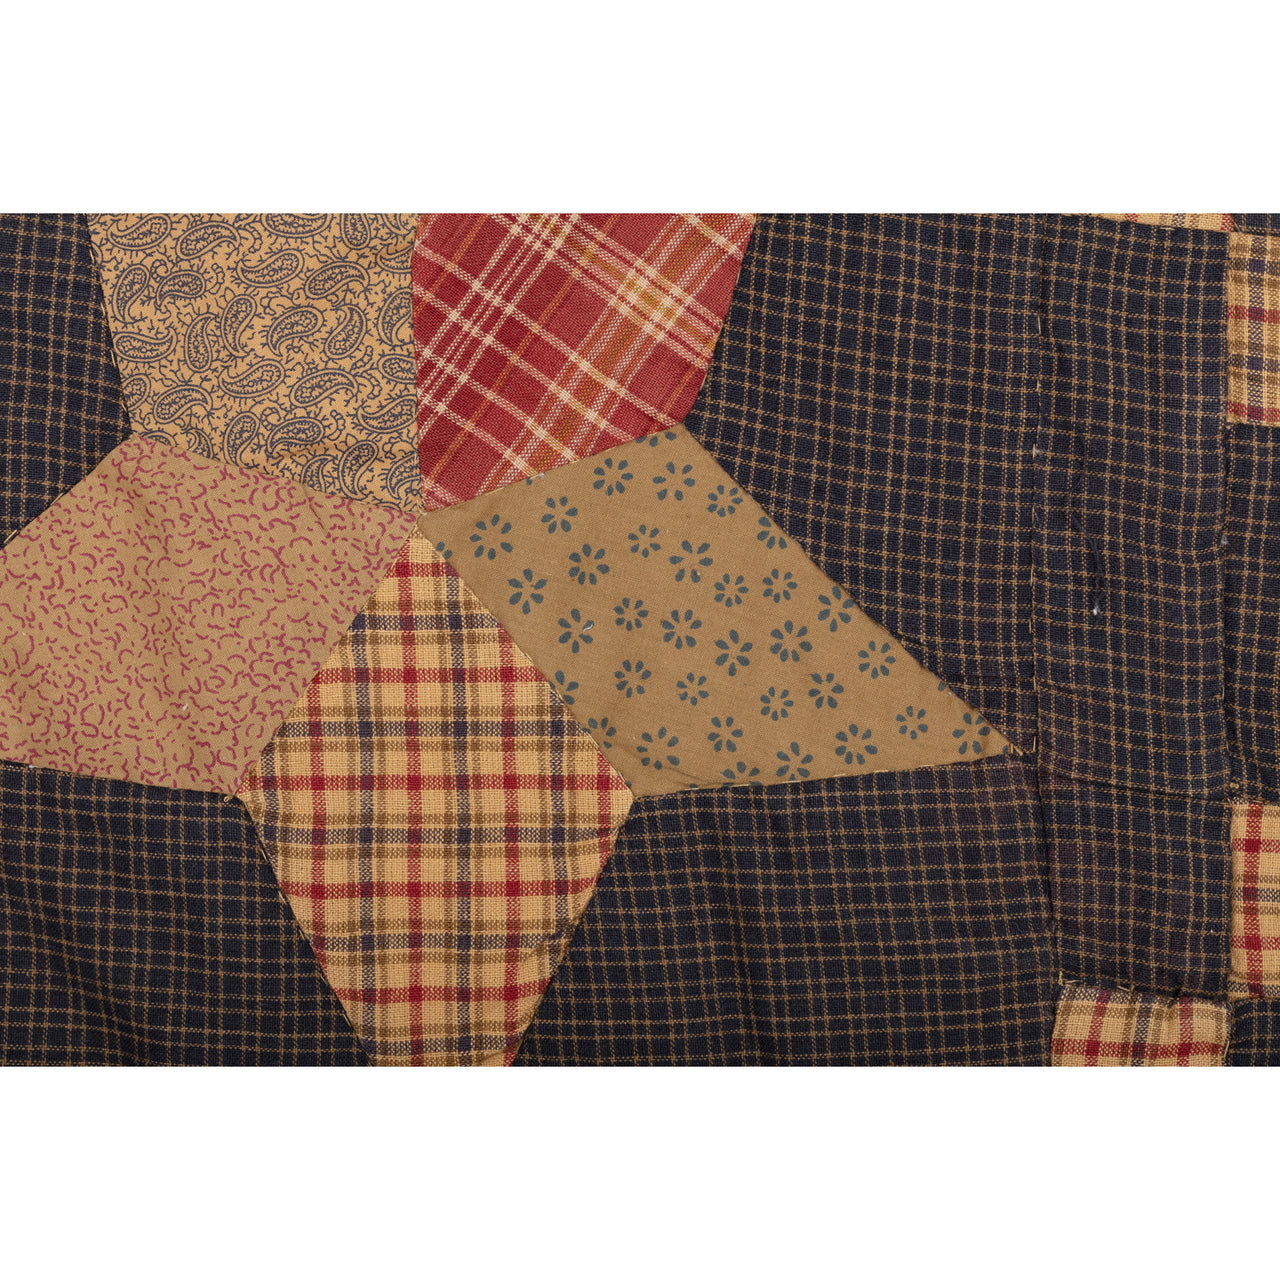 Arlington Runner Quilted Patchwork Star 13x48 VHC Brands